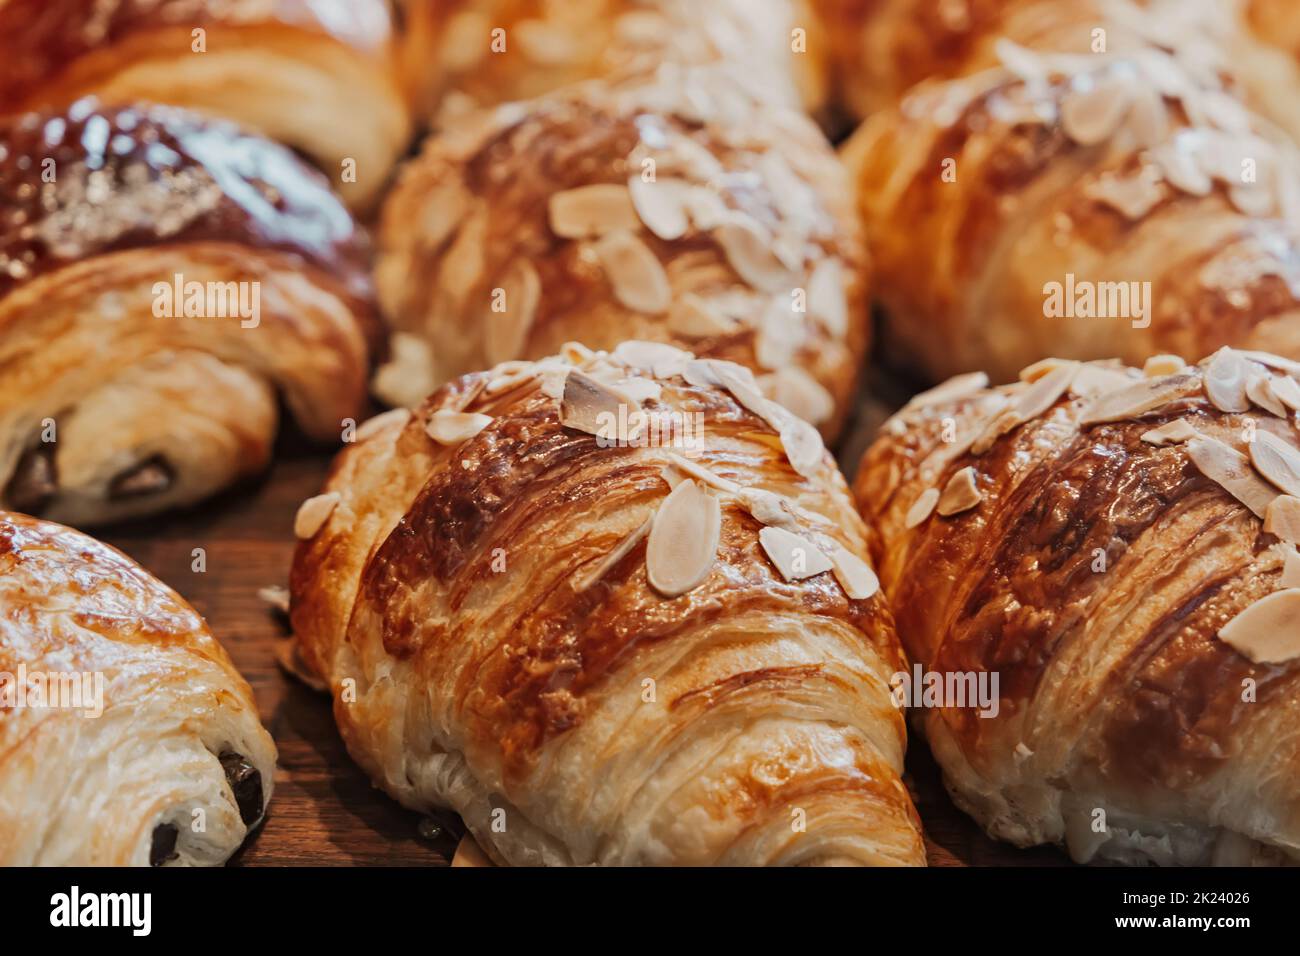 Fresh almond and chocolate croissants at a bakery. Stock Photo